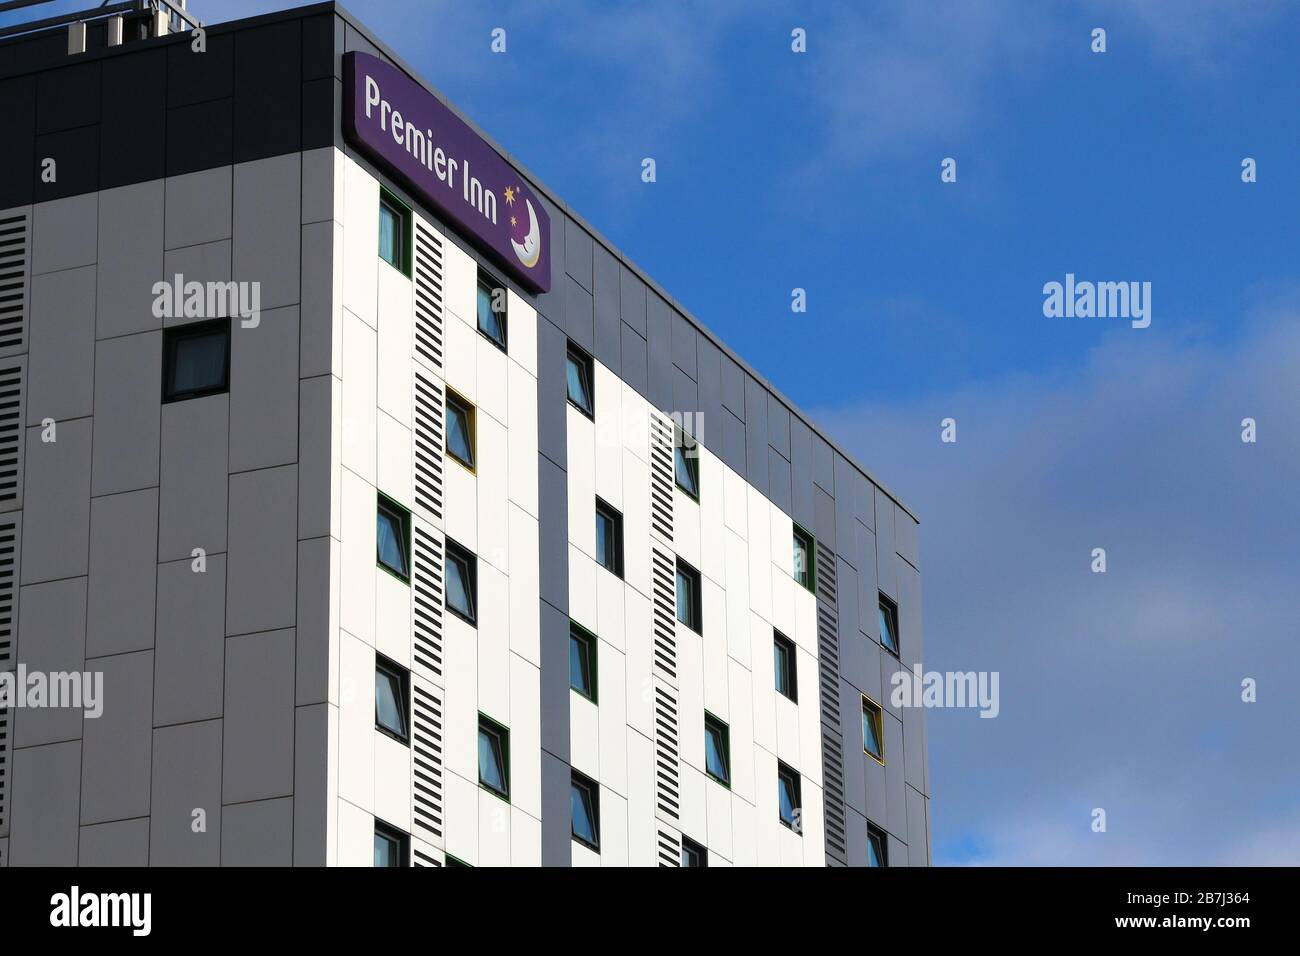 BRADFORD, UK - JULY 11, 2016: Premier Inn hotel in Bradford, UK. It is the largest hotel chain in the UK with 50,000 rooms in 650 hotels. Stock Photo